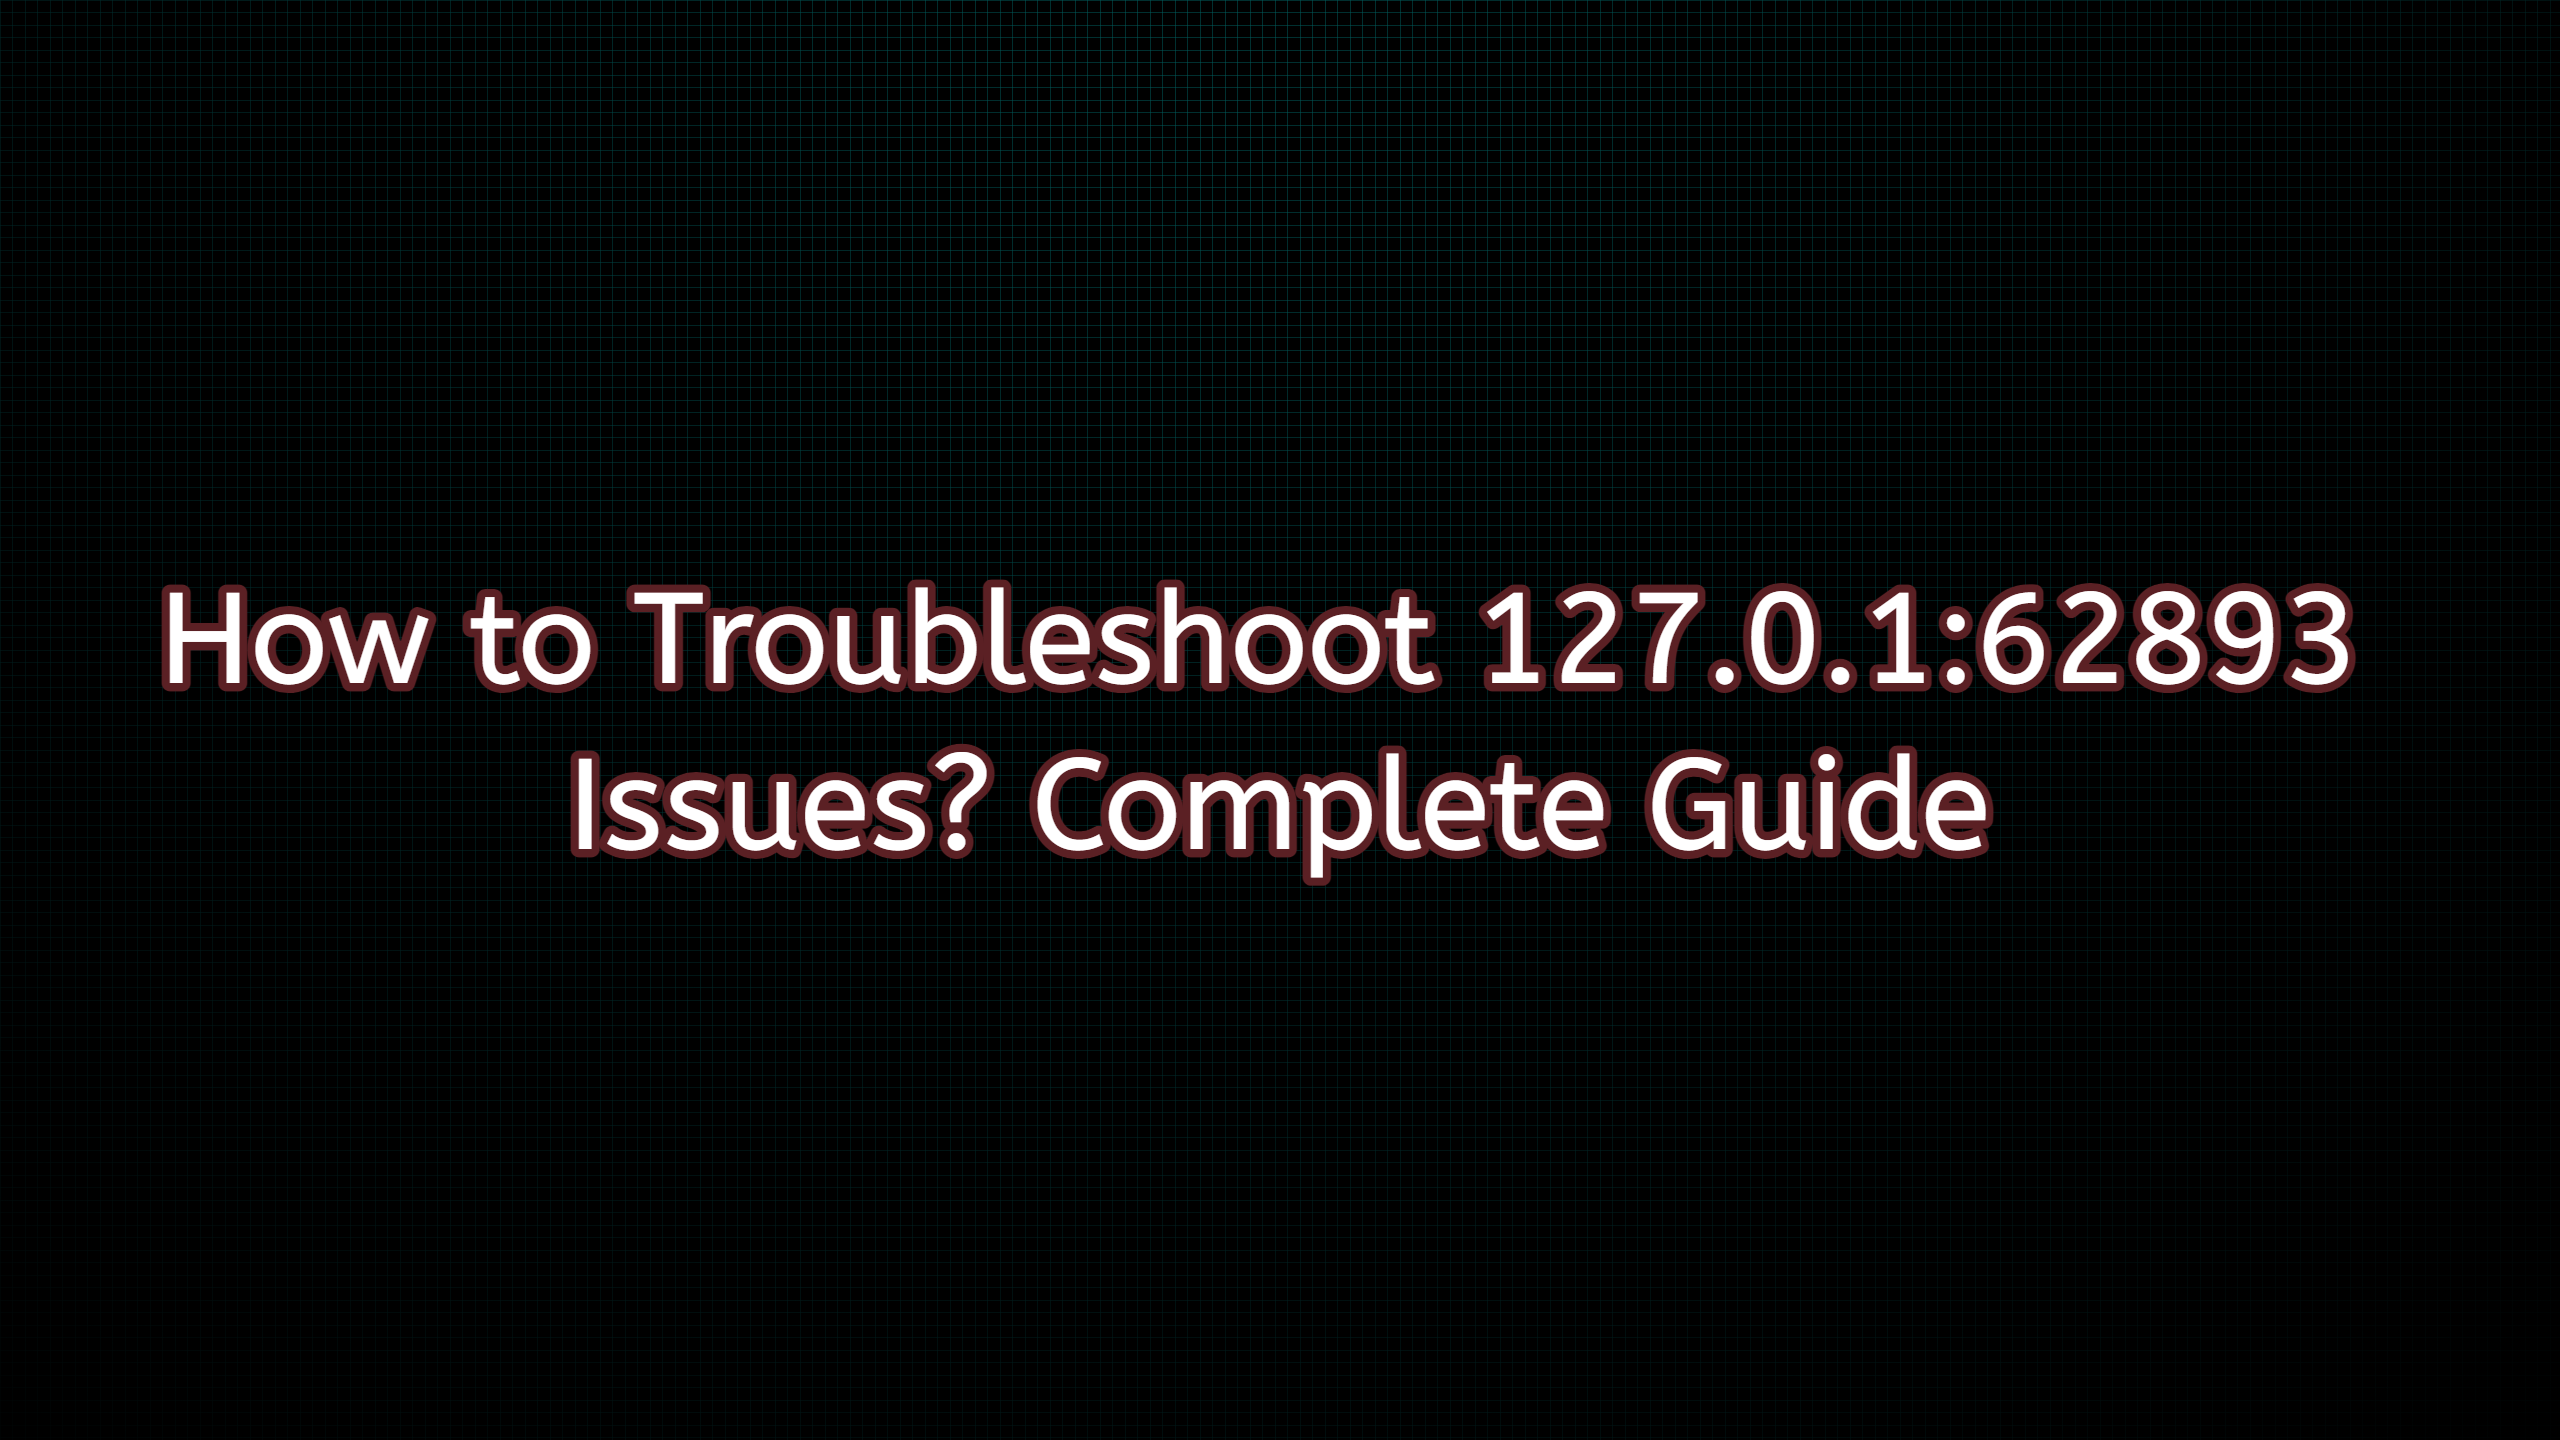 How to Troubleshoot 127.0.1:62893 Issues? Complete Guide